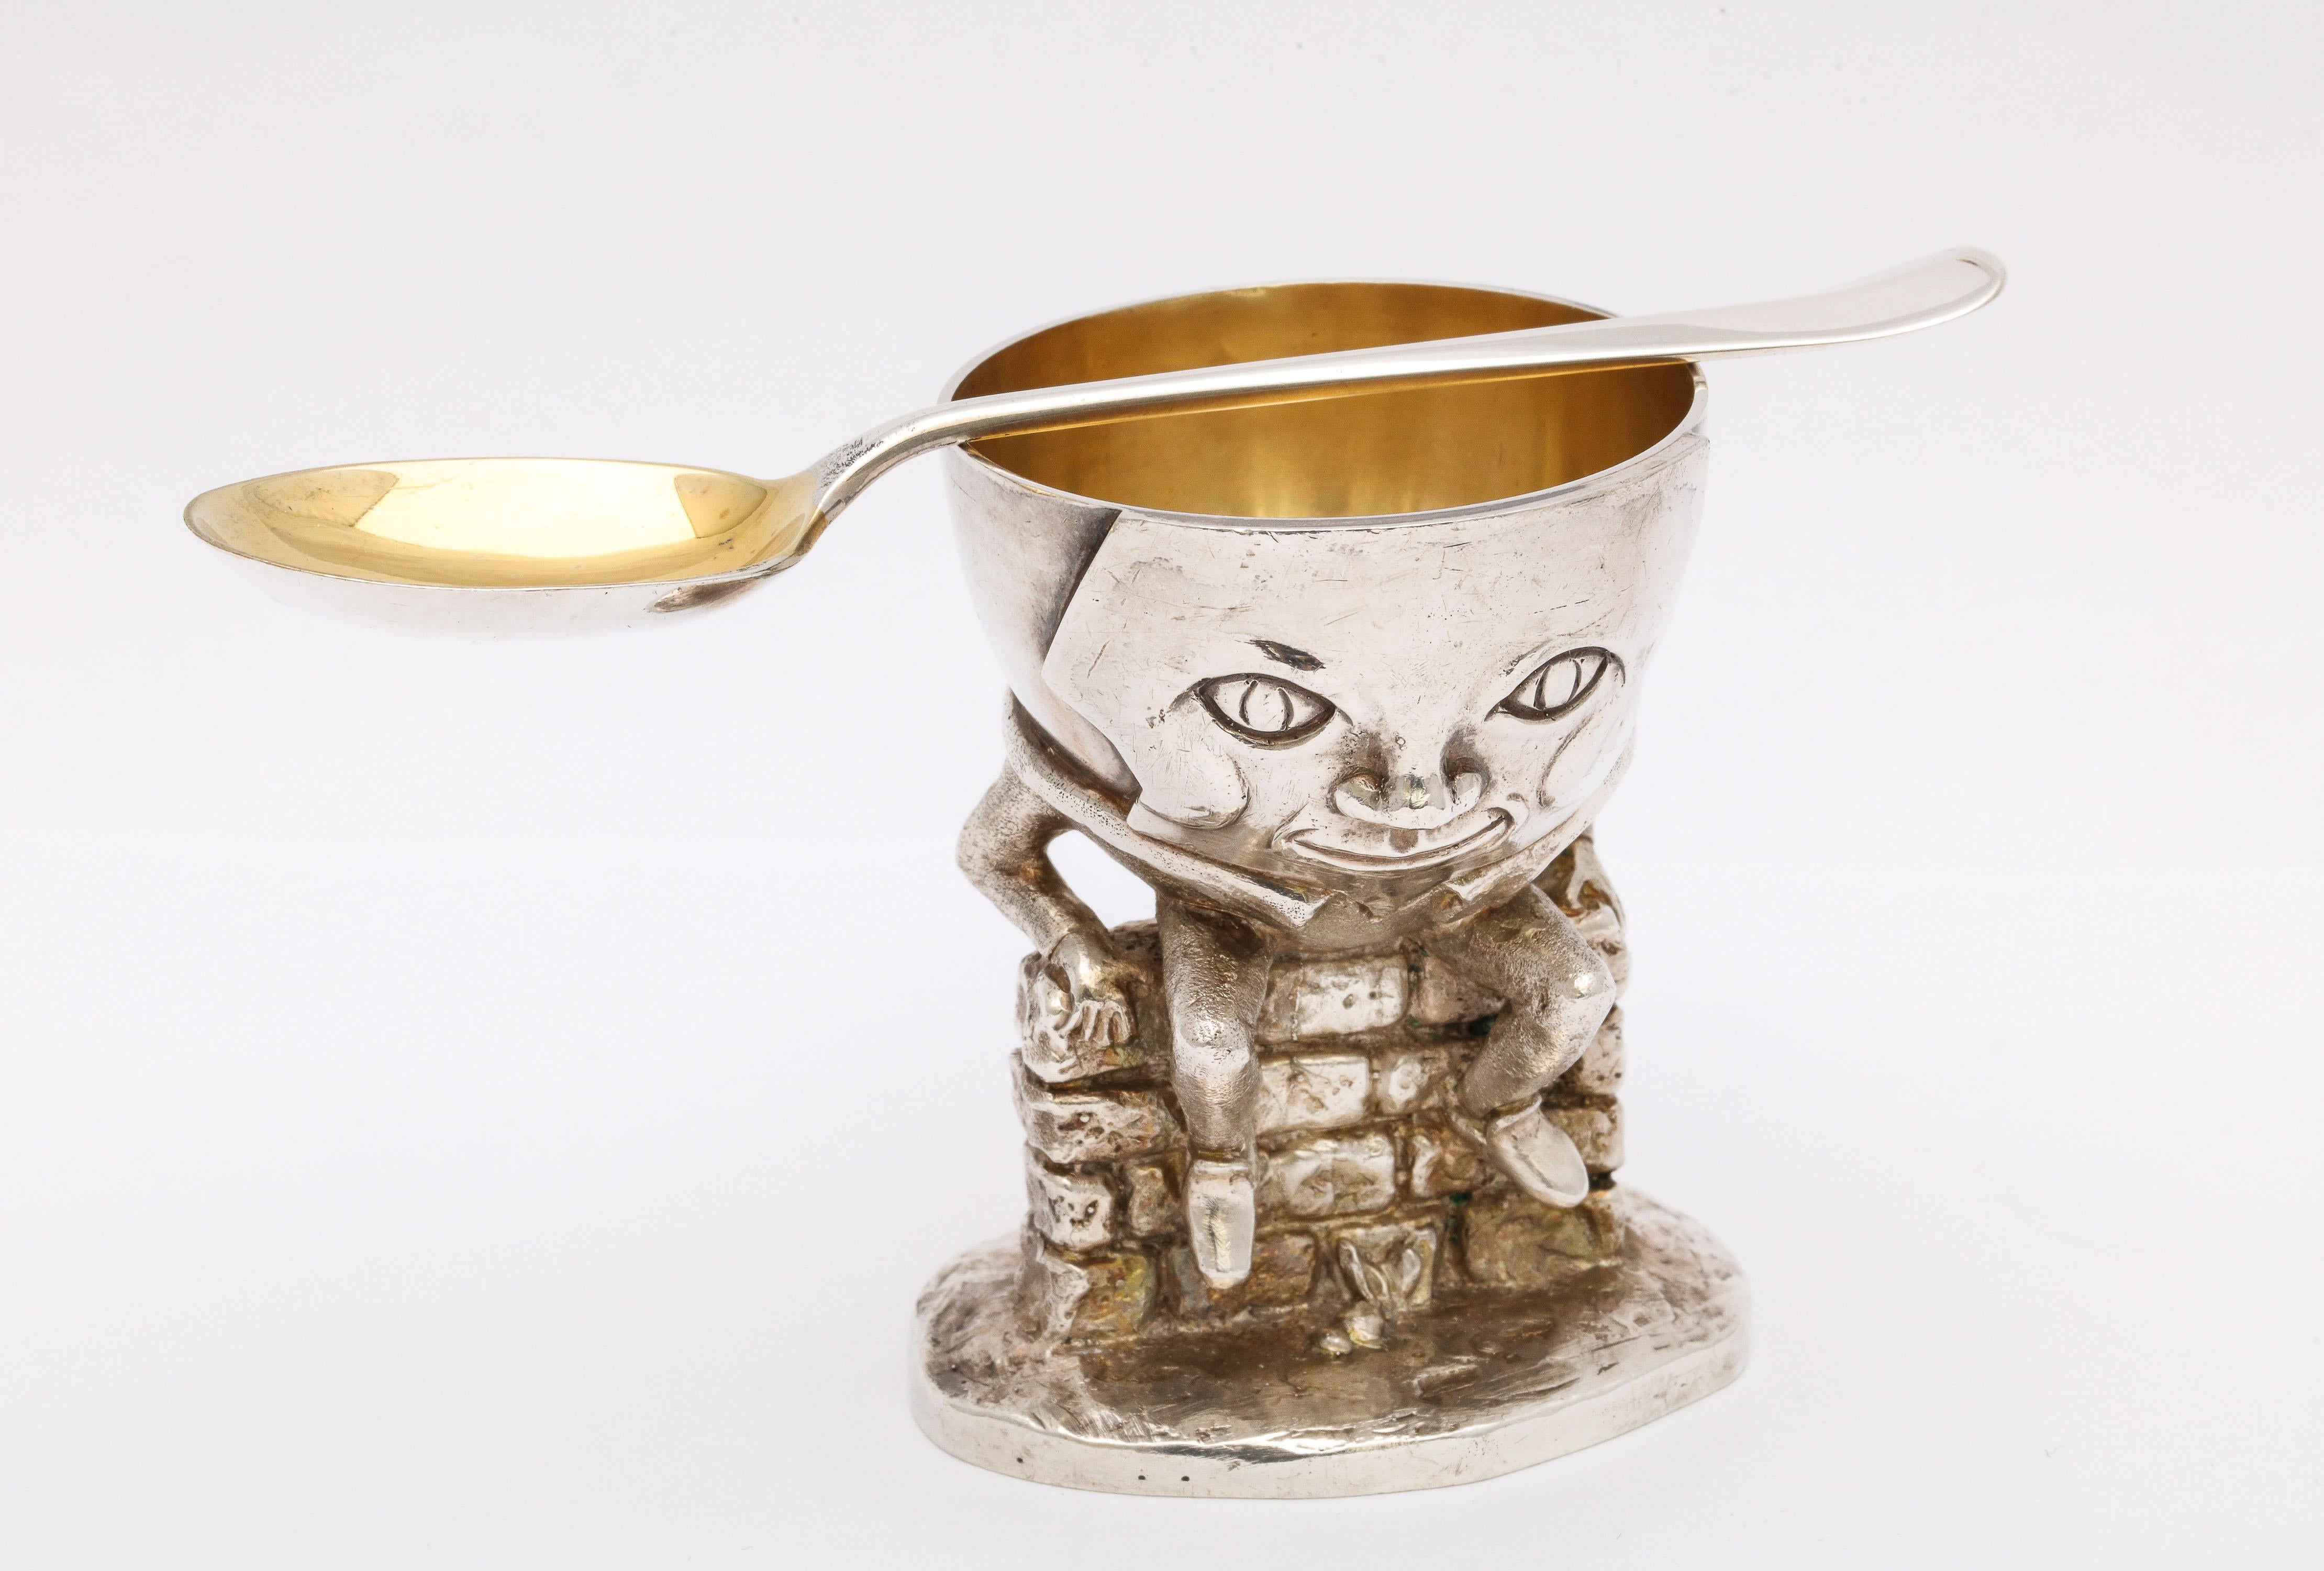 Unusual, midcentury, sterling silver, parcel gilt, humpty dumpty-form egg cup with matching spoon, London, year hallmarked for 1982, Atkin Bros. - makers. Inside of egg cup is gilded as is bowl of spoon. Egg cup stands 2 3/4 inches high x 2 1/4